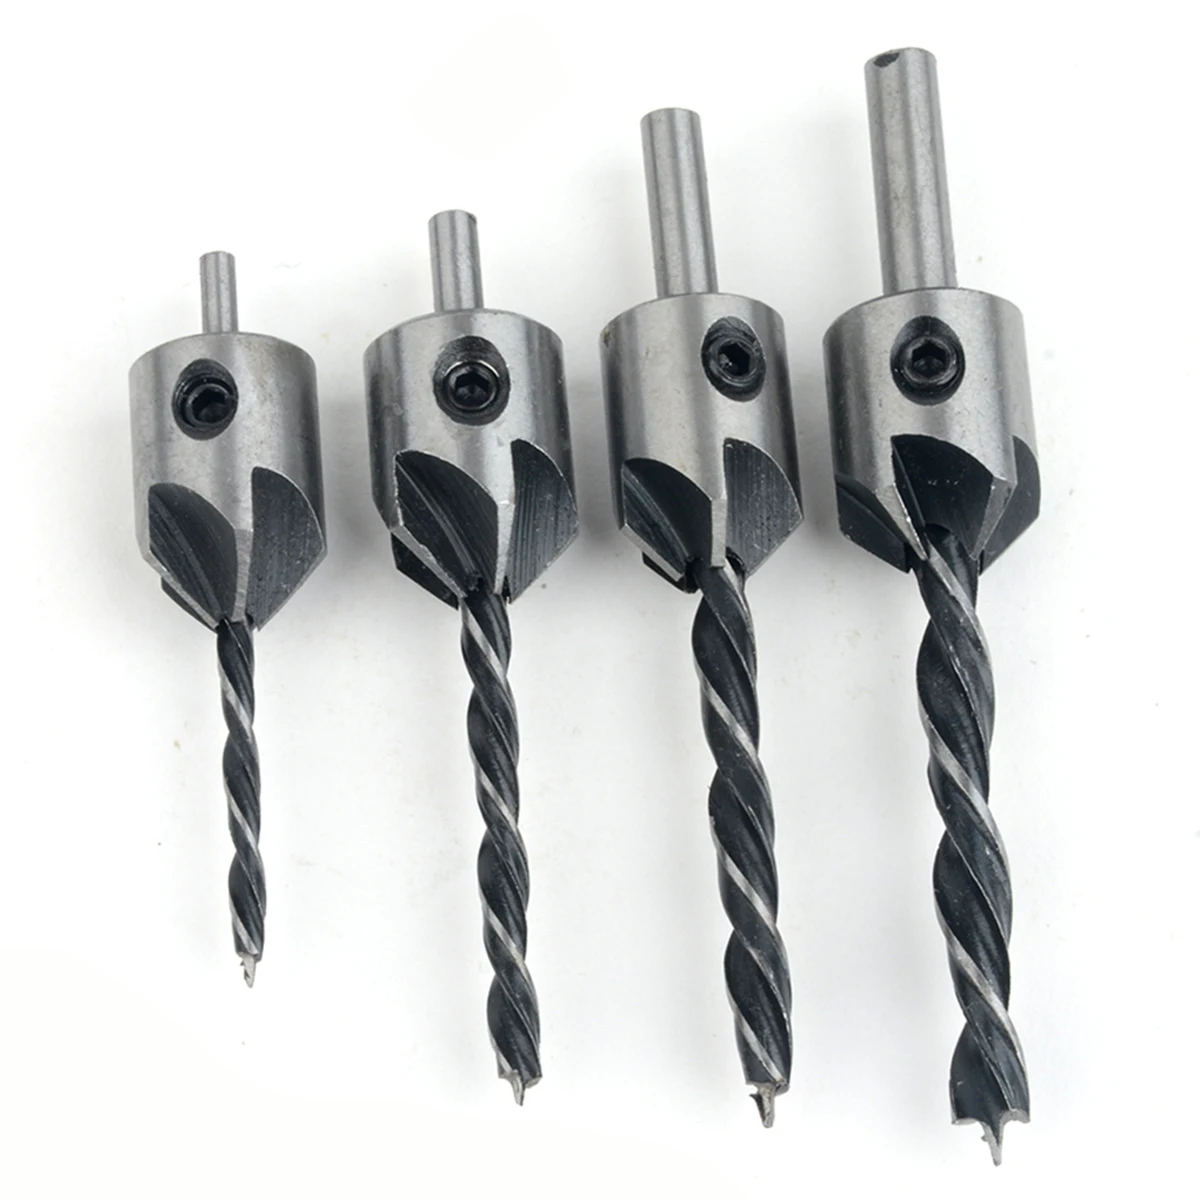 4pcs 5 Flute Countersink Drill Bit Set HSS Screw Woodworking Chamfering Tools 3/4/5/6mm with Wrench